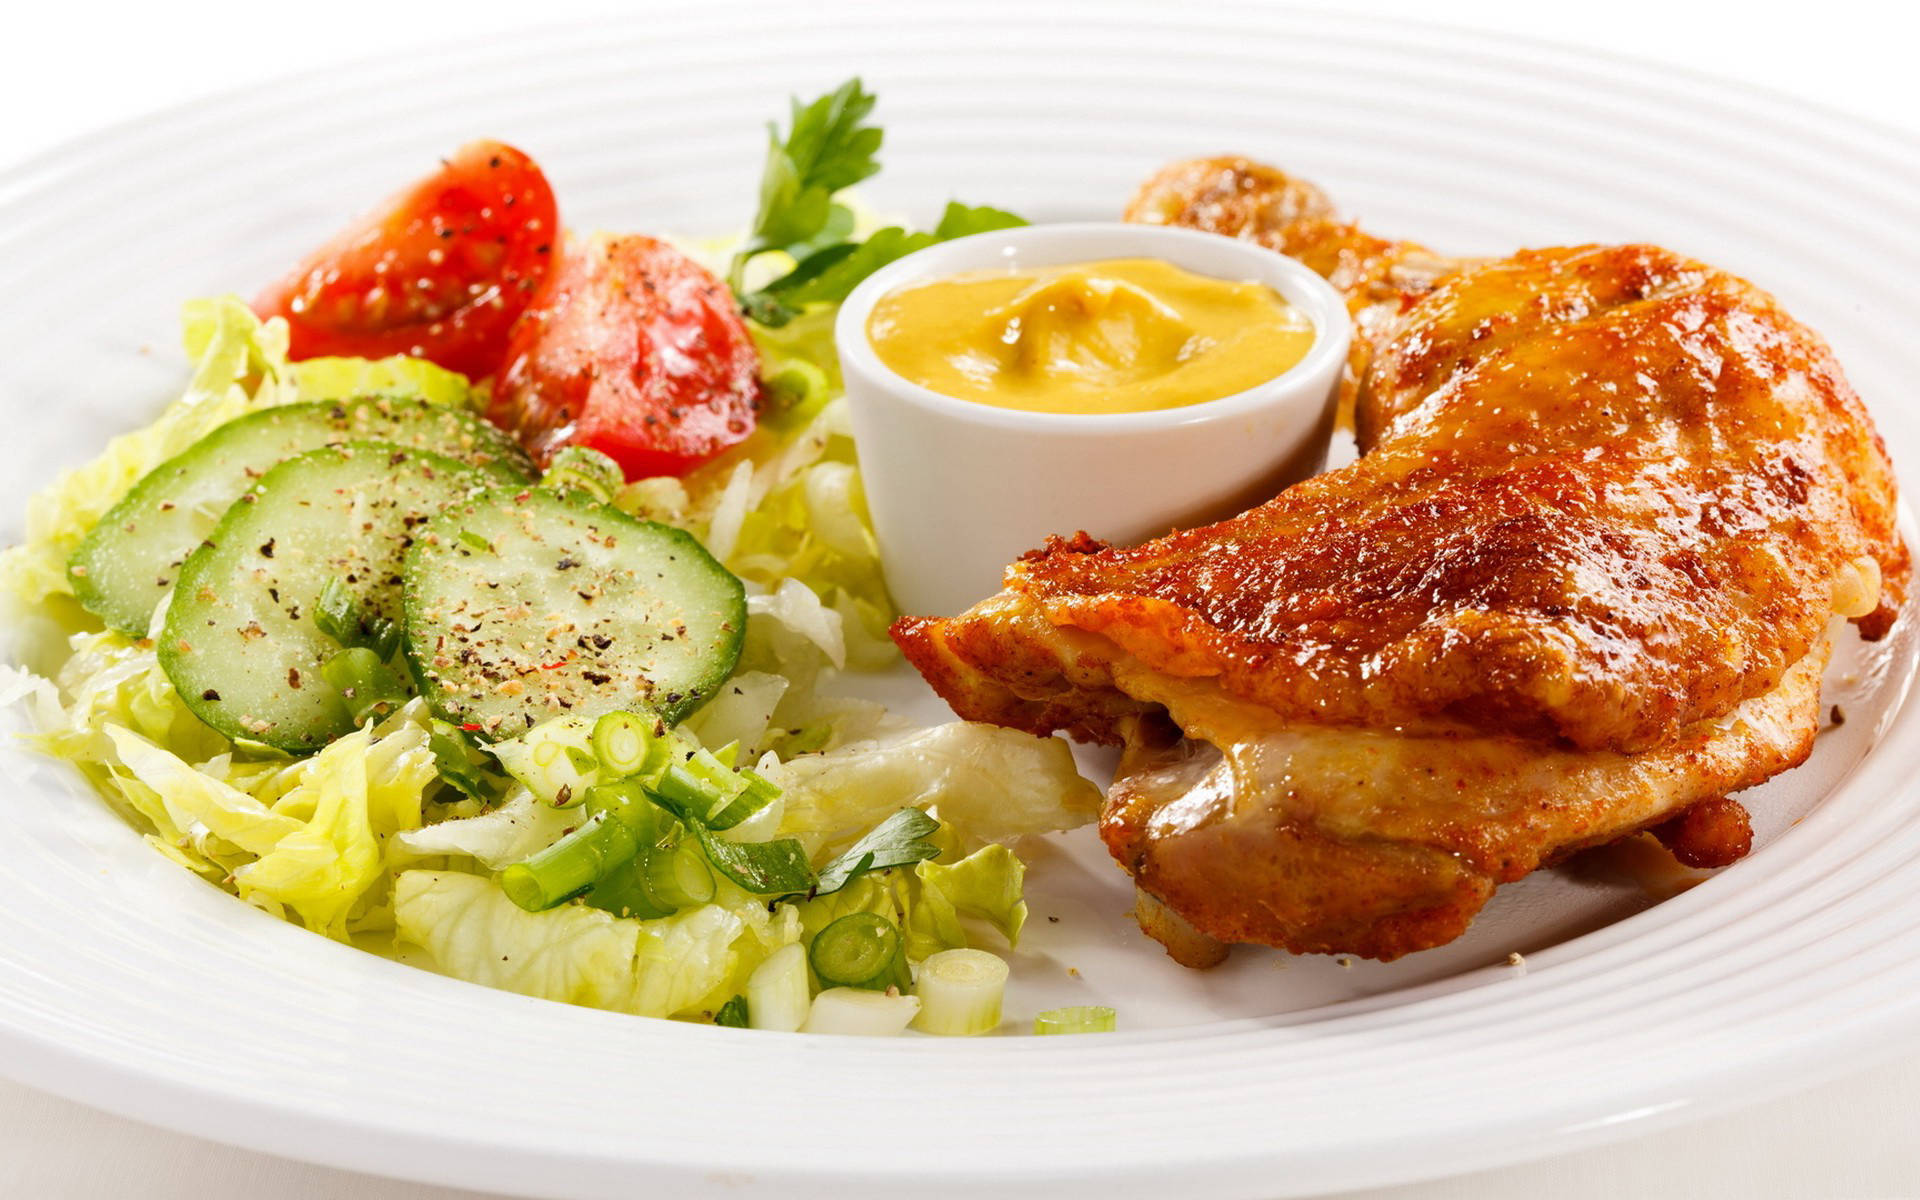 Roasted Chicken Leg With Veggie Sides Lunch Wallpaper